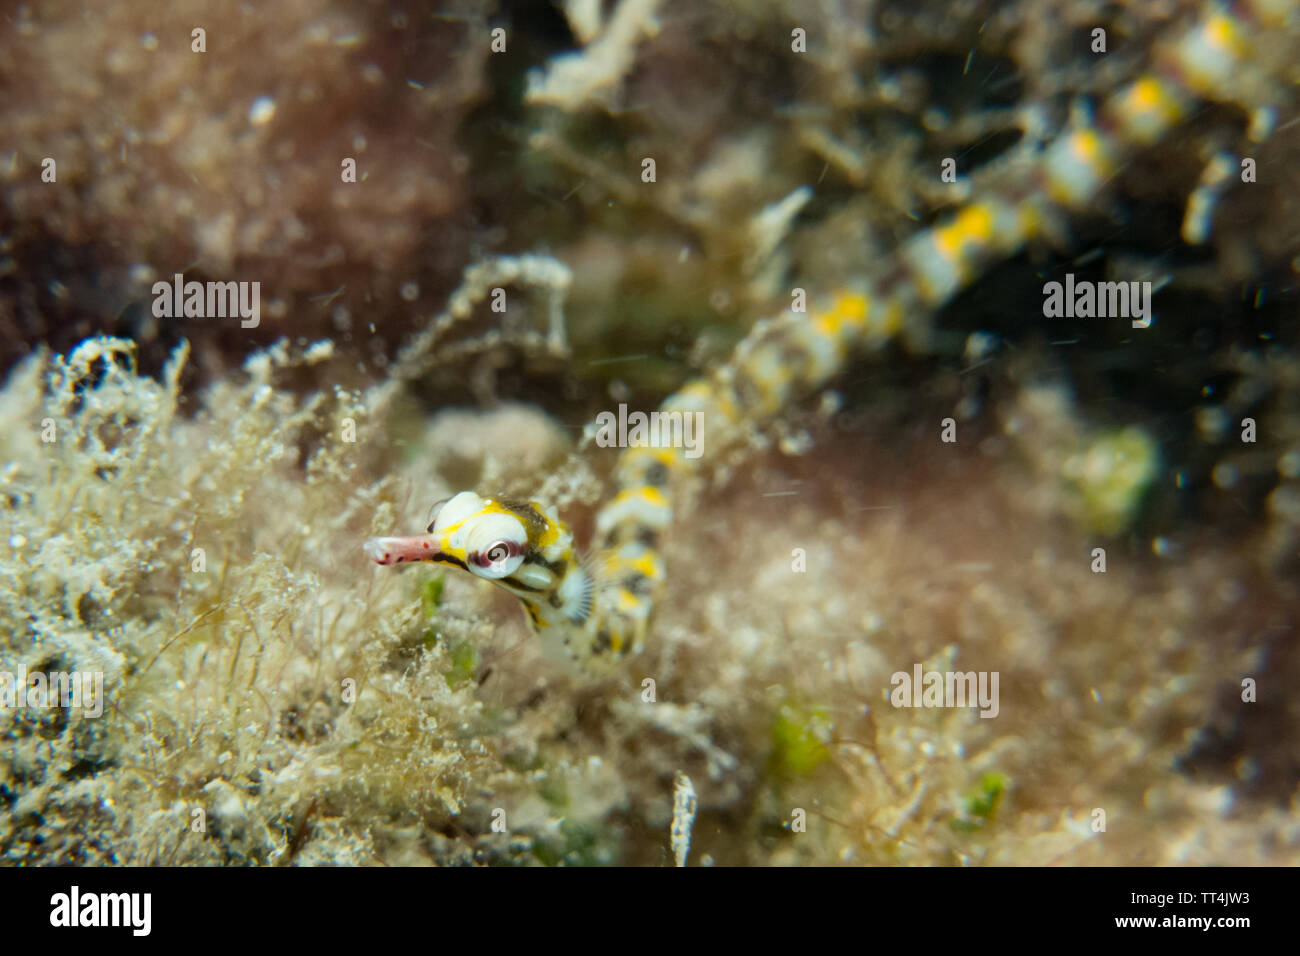 Network pipefish in the shallows while snorkeling at Huahine Island, French Polynesia Stock Photo